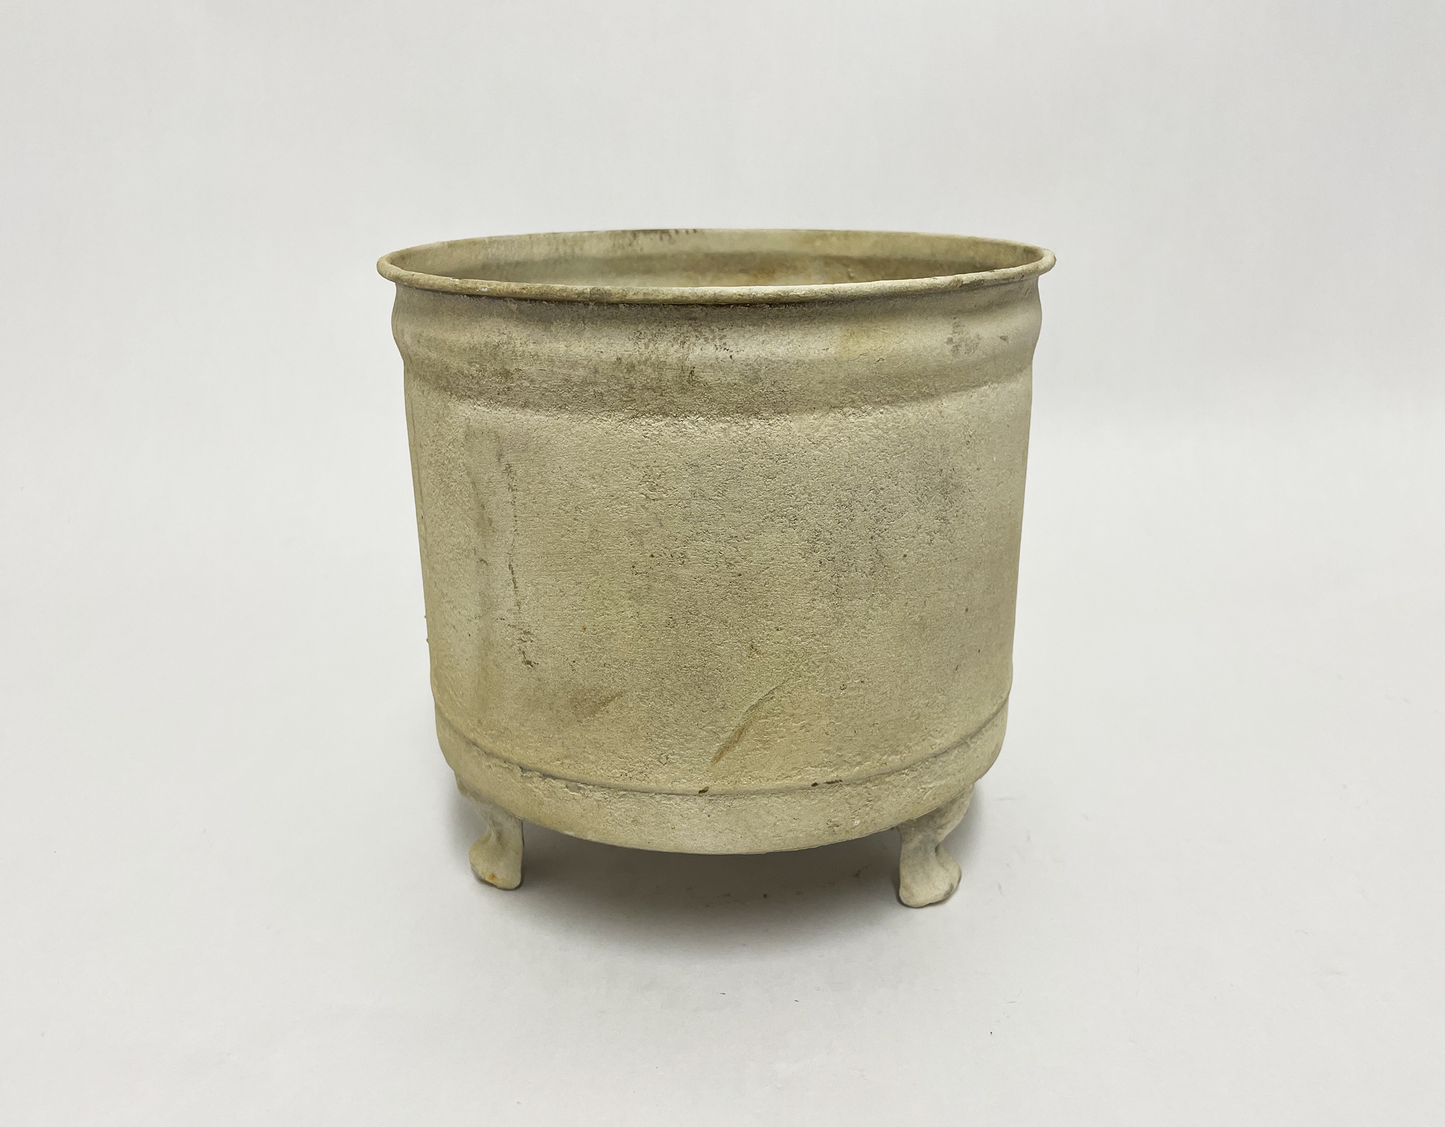 Distressed Metal - Round Footed Planter, 8"w x 8"d x 8"h